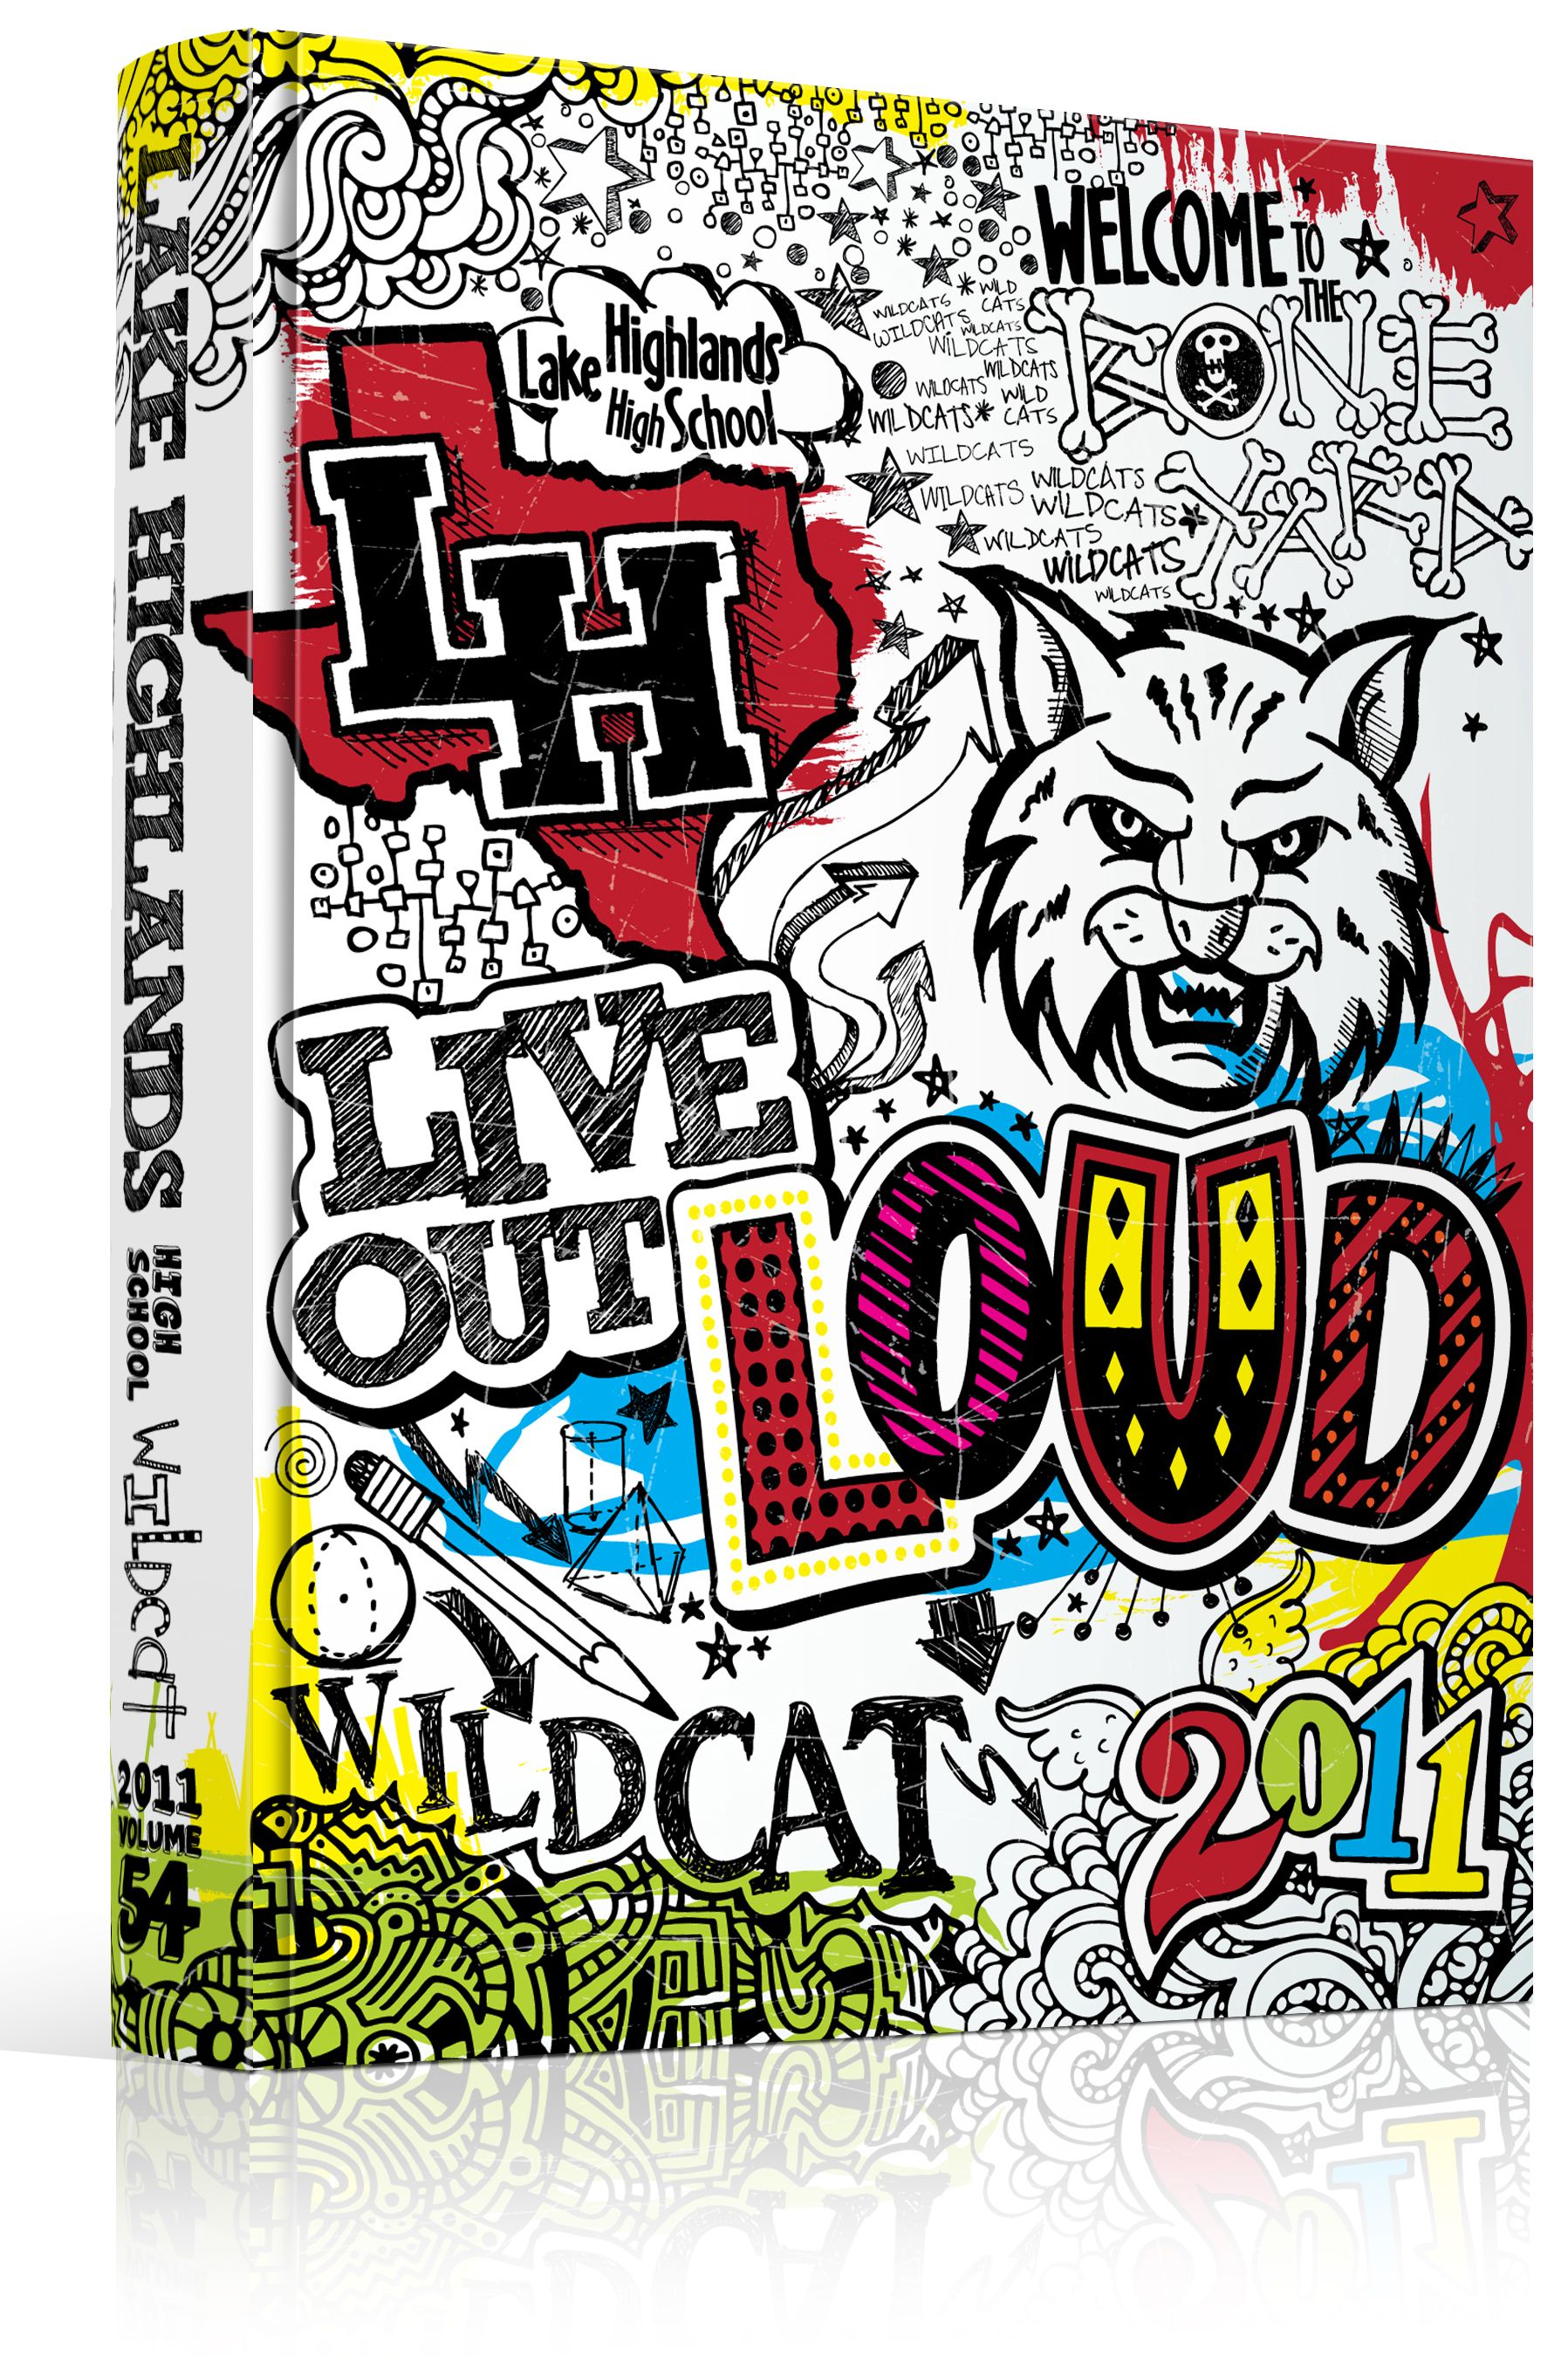 High School Yearbook Cover Design Ideas